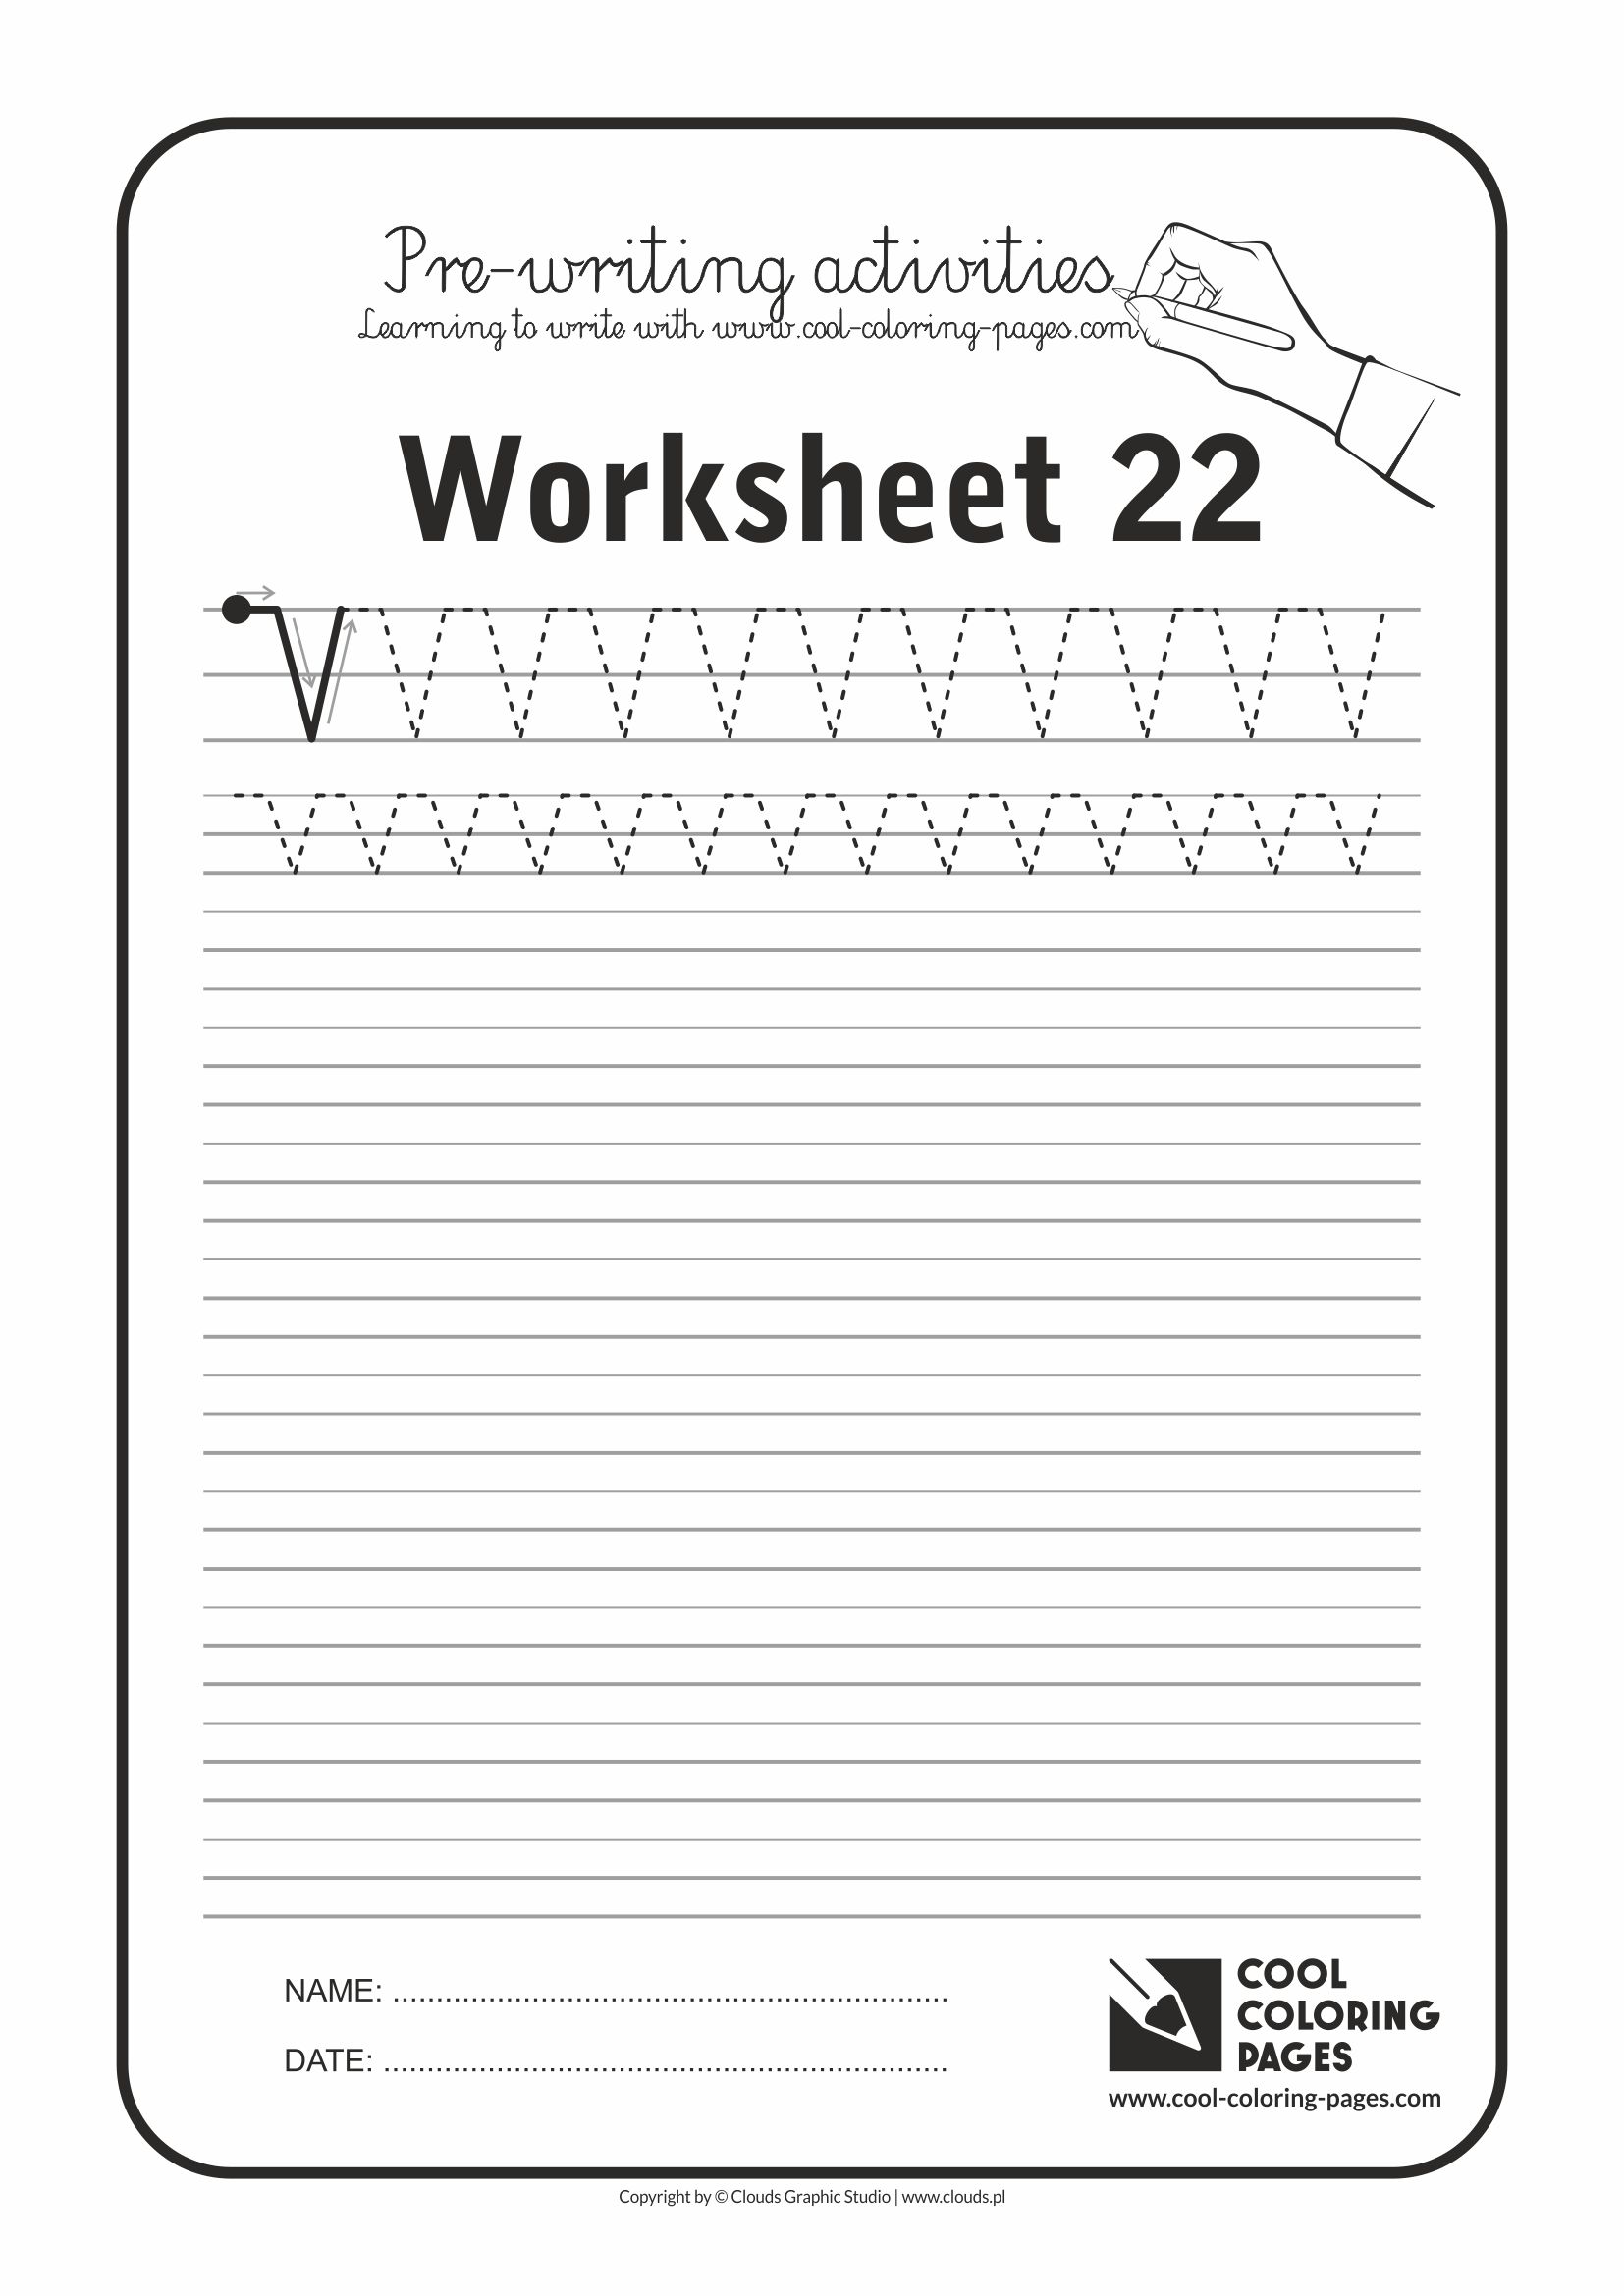 Cool Coloring Pages / Pre-writing activities / Worksheet no.22